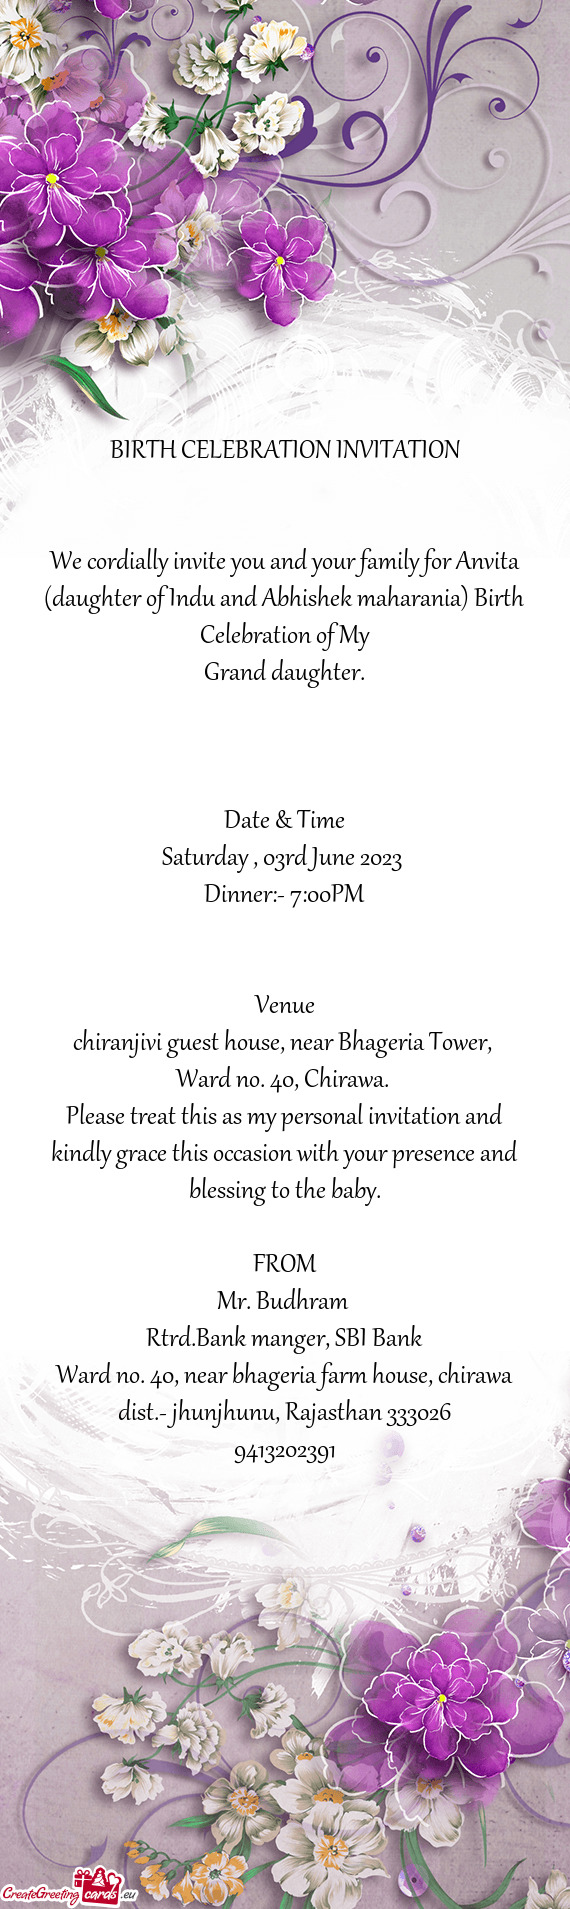 We cordially invite you and your family for Anvita (daughter of Indu and Abhishek maharania) Birth C